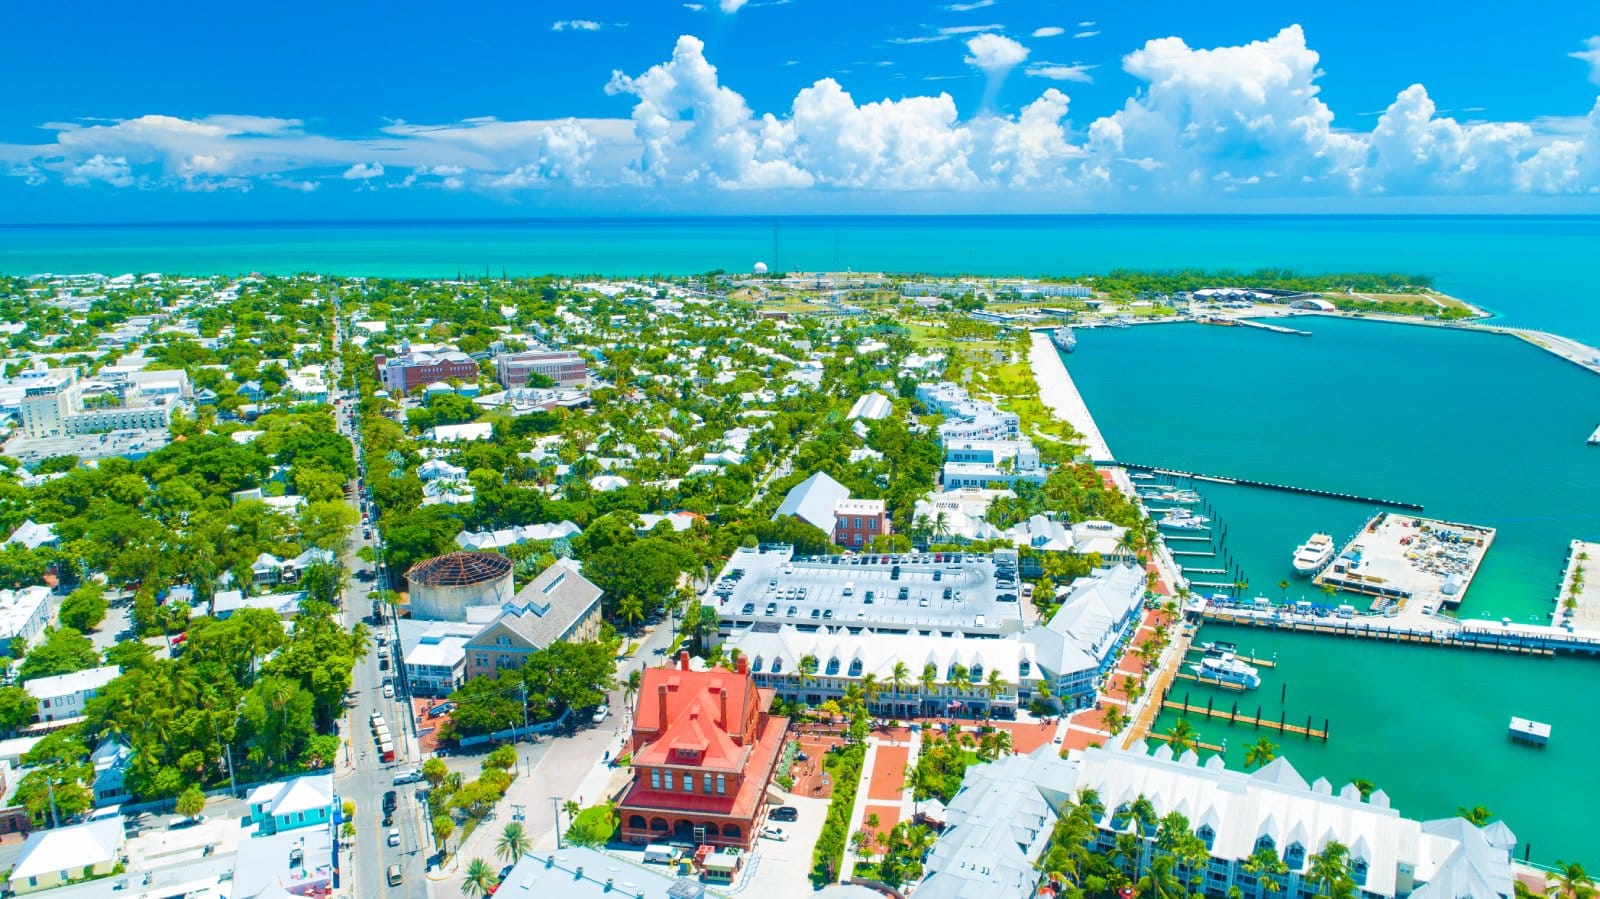 <p class="wp-caption-text">Image Credit: Shutterstock / Mia2you</p>  <p><span>At the southernmost tip of the U.S., Key West is where the party never stops. House rentals hover around $3,000, but who needs a house when you can rent a boat to live on? Yes, live on a boat and tell tales of your sea adventures to all who’ll listen.</span></p>